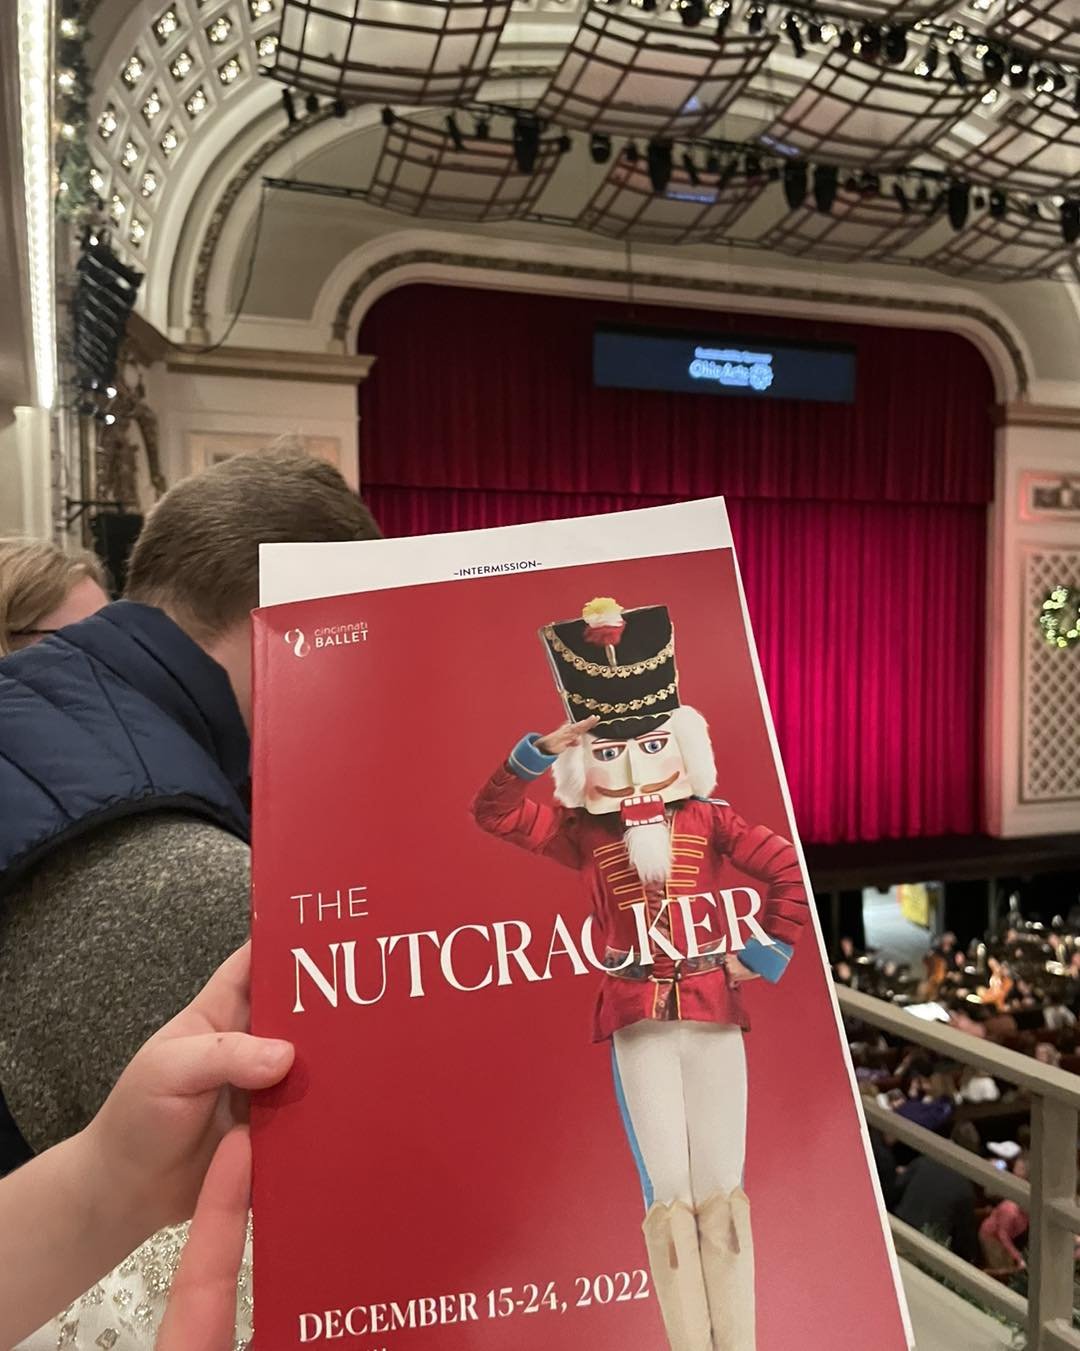 Took my munchkin to the Nutcracker tonight! It will be so sweet to experience it through her eyes. ❤️